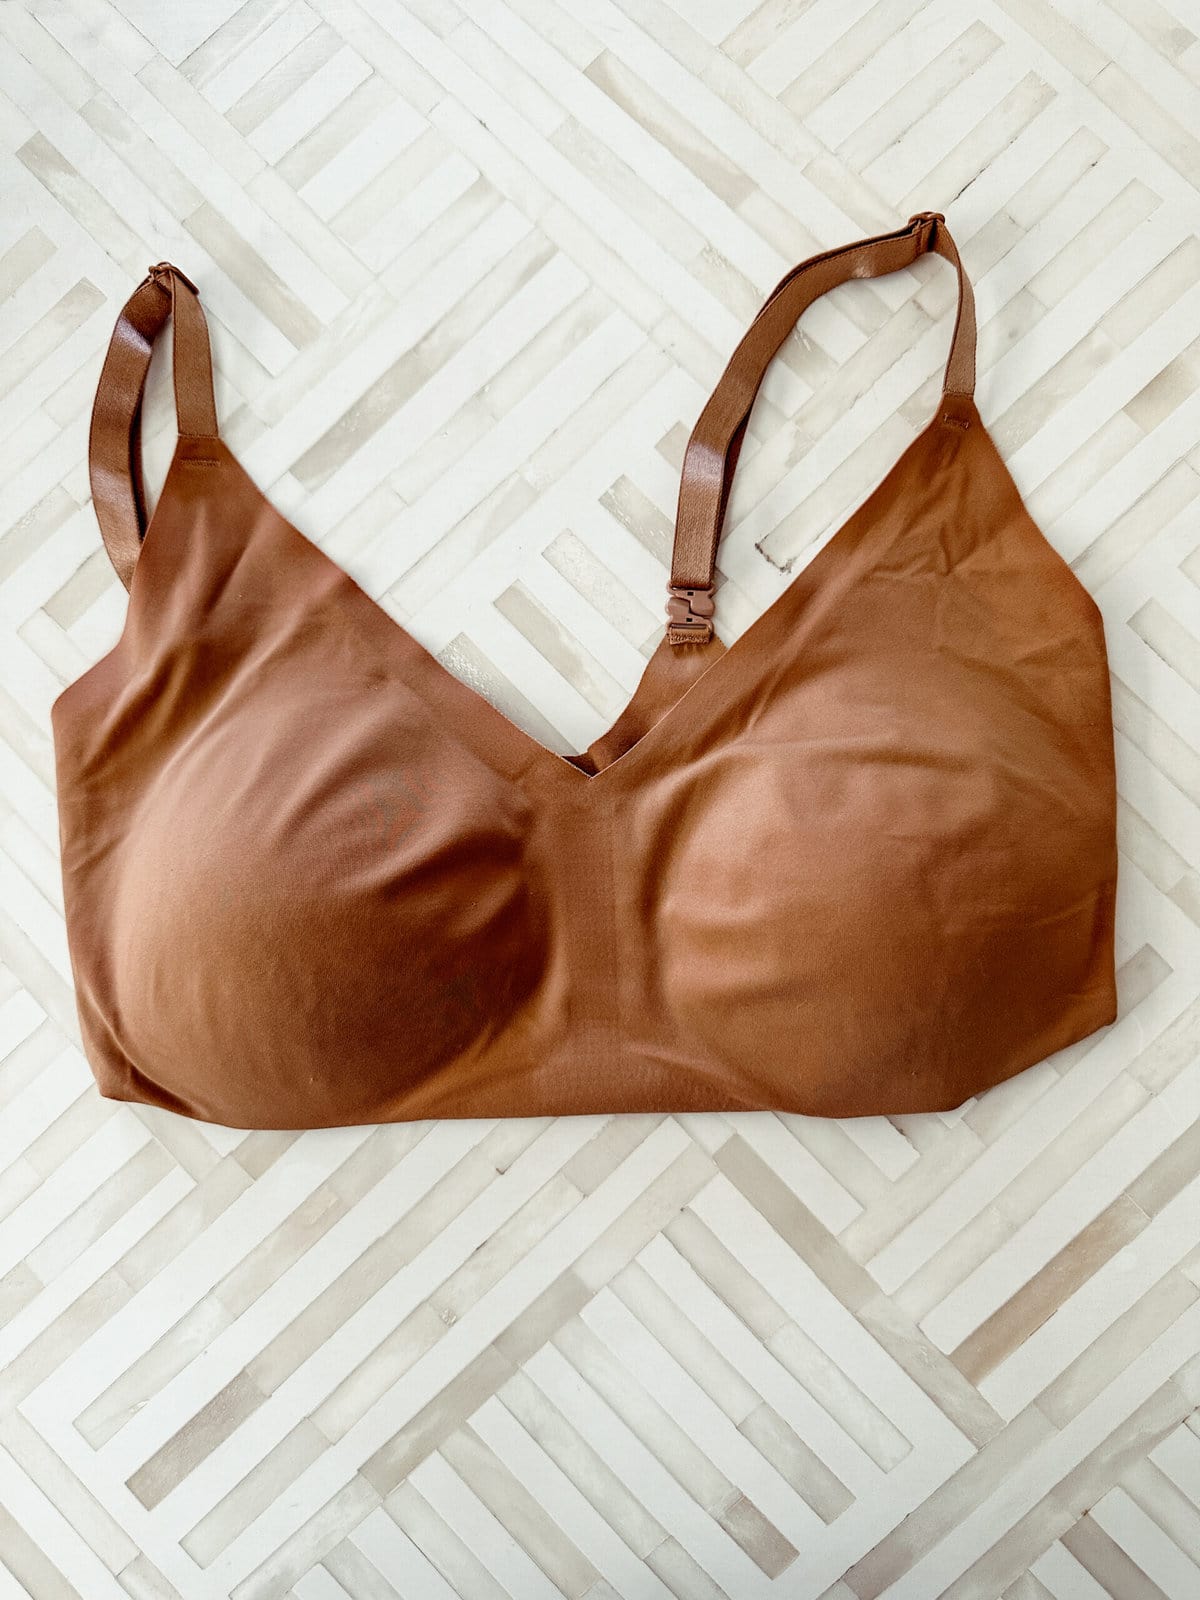 10 Can't-Miss Bra Deals from the Nordstrom Anniversary Sale